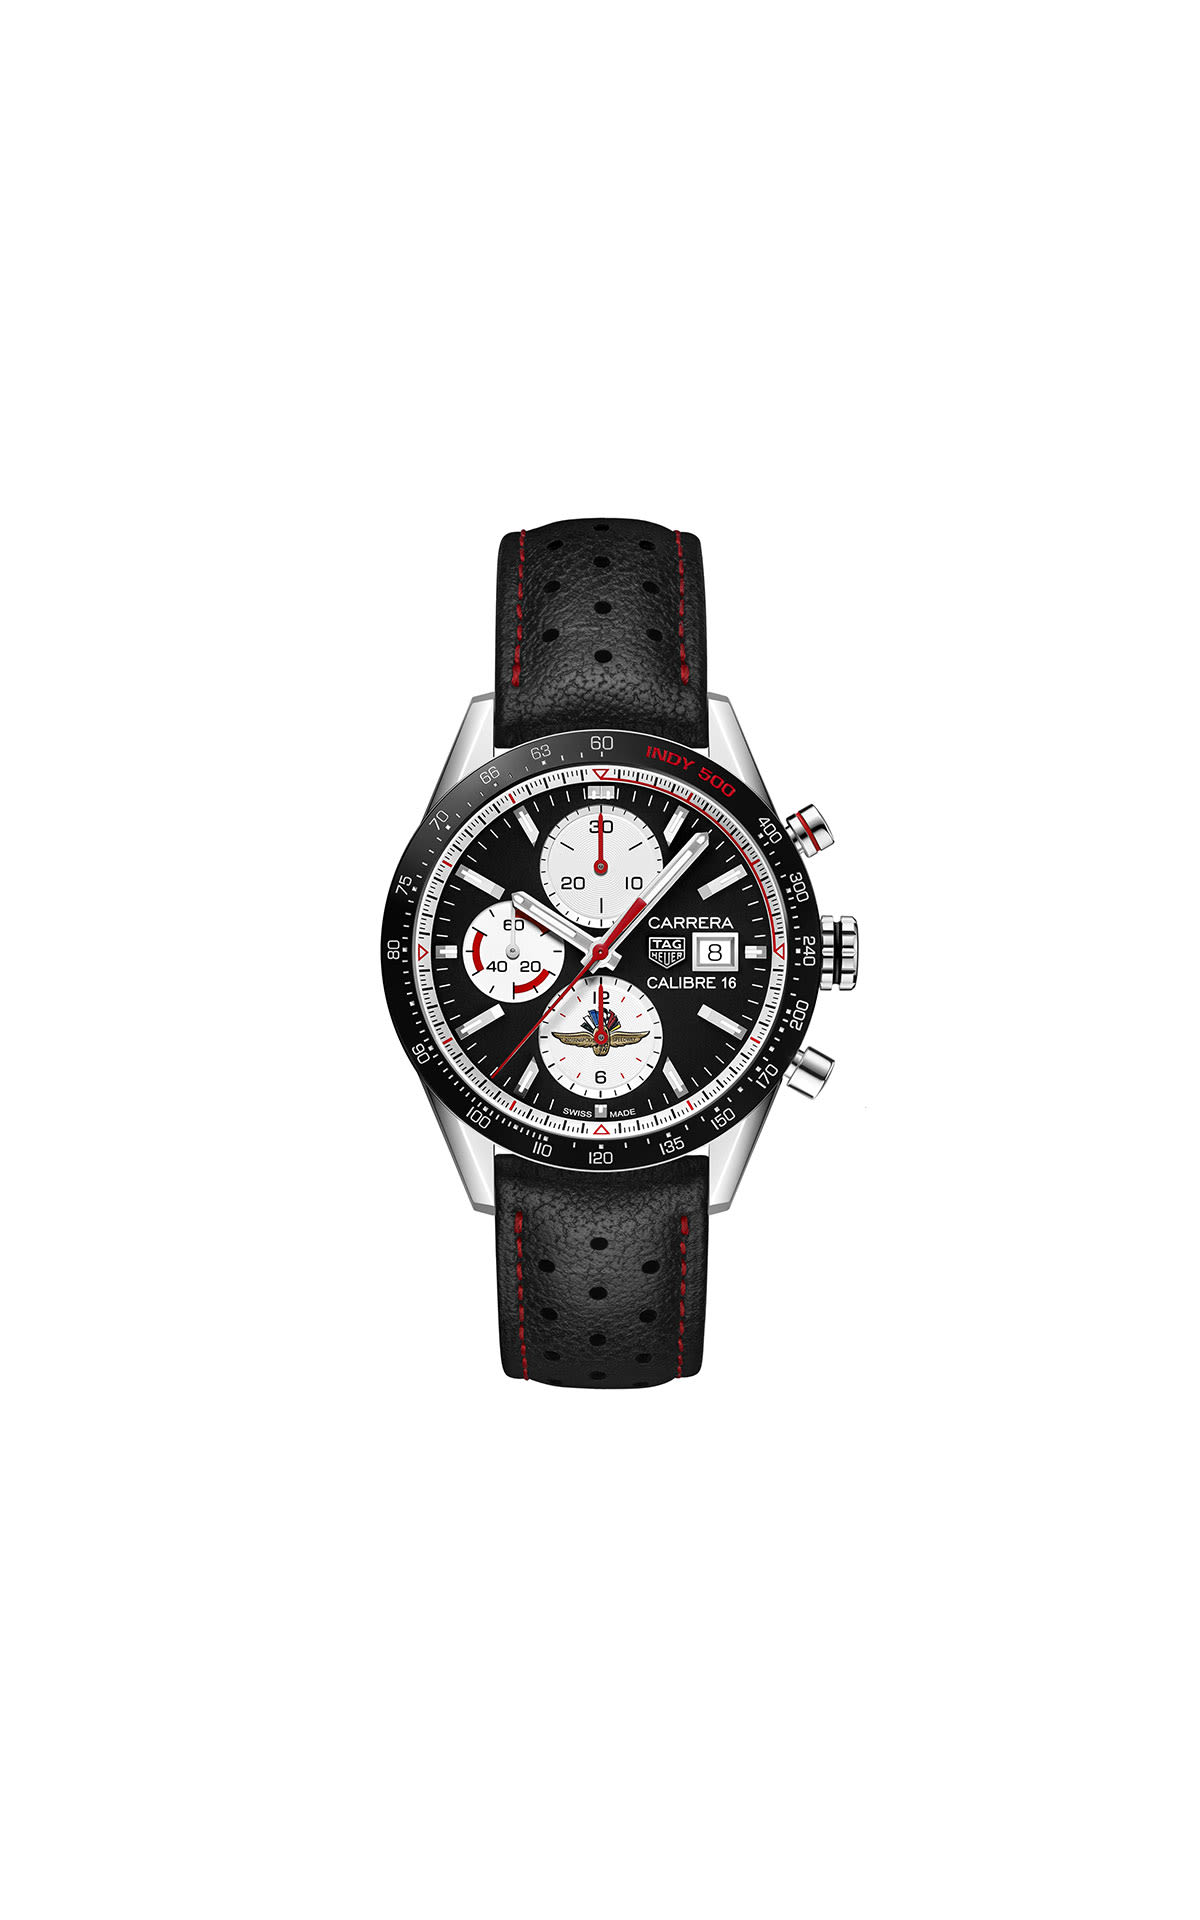 TAG Heuer Men’s carrera indy 500 special edition from Bicester Village